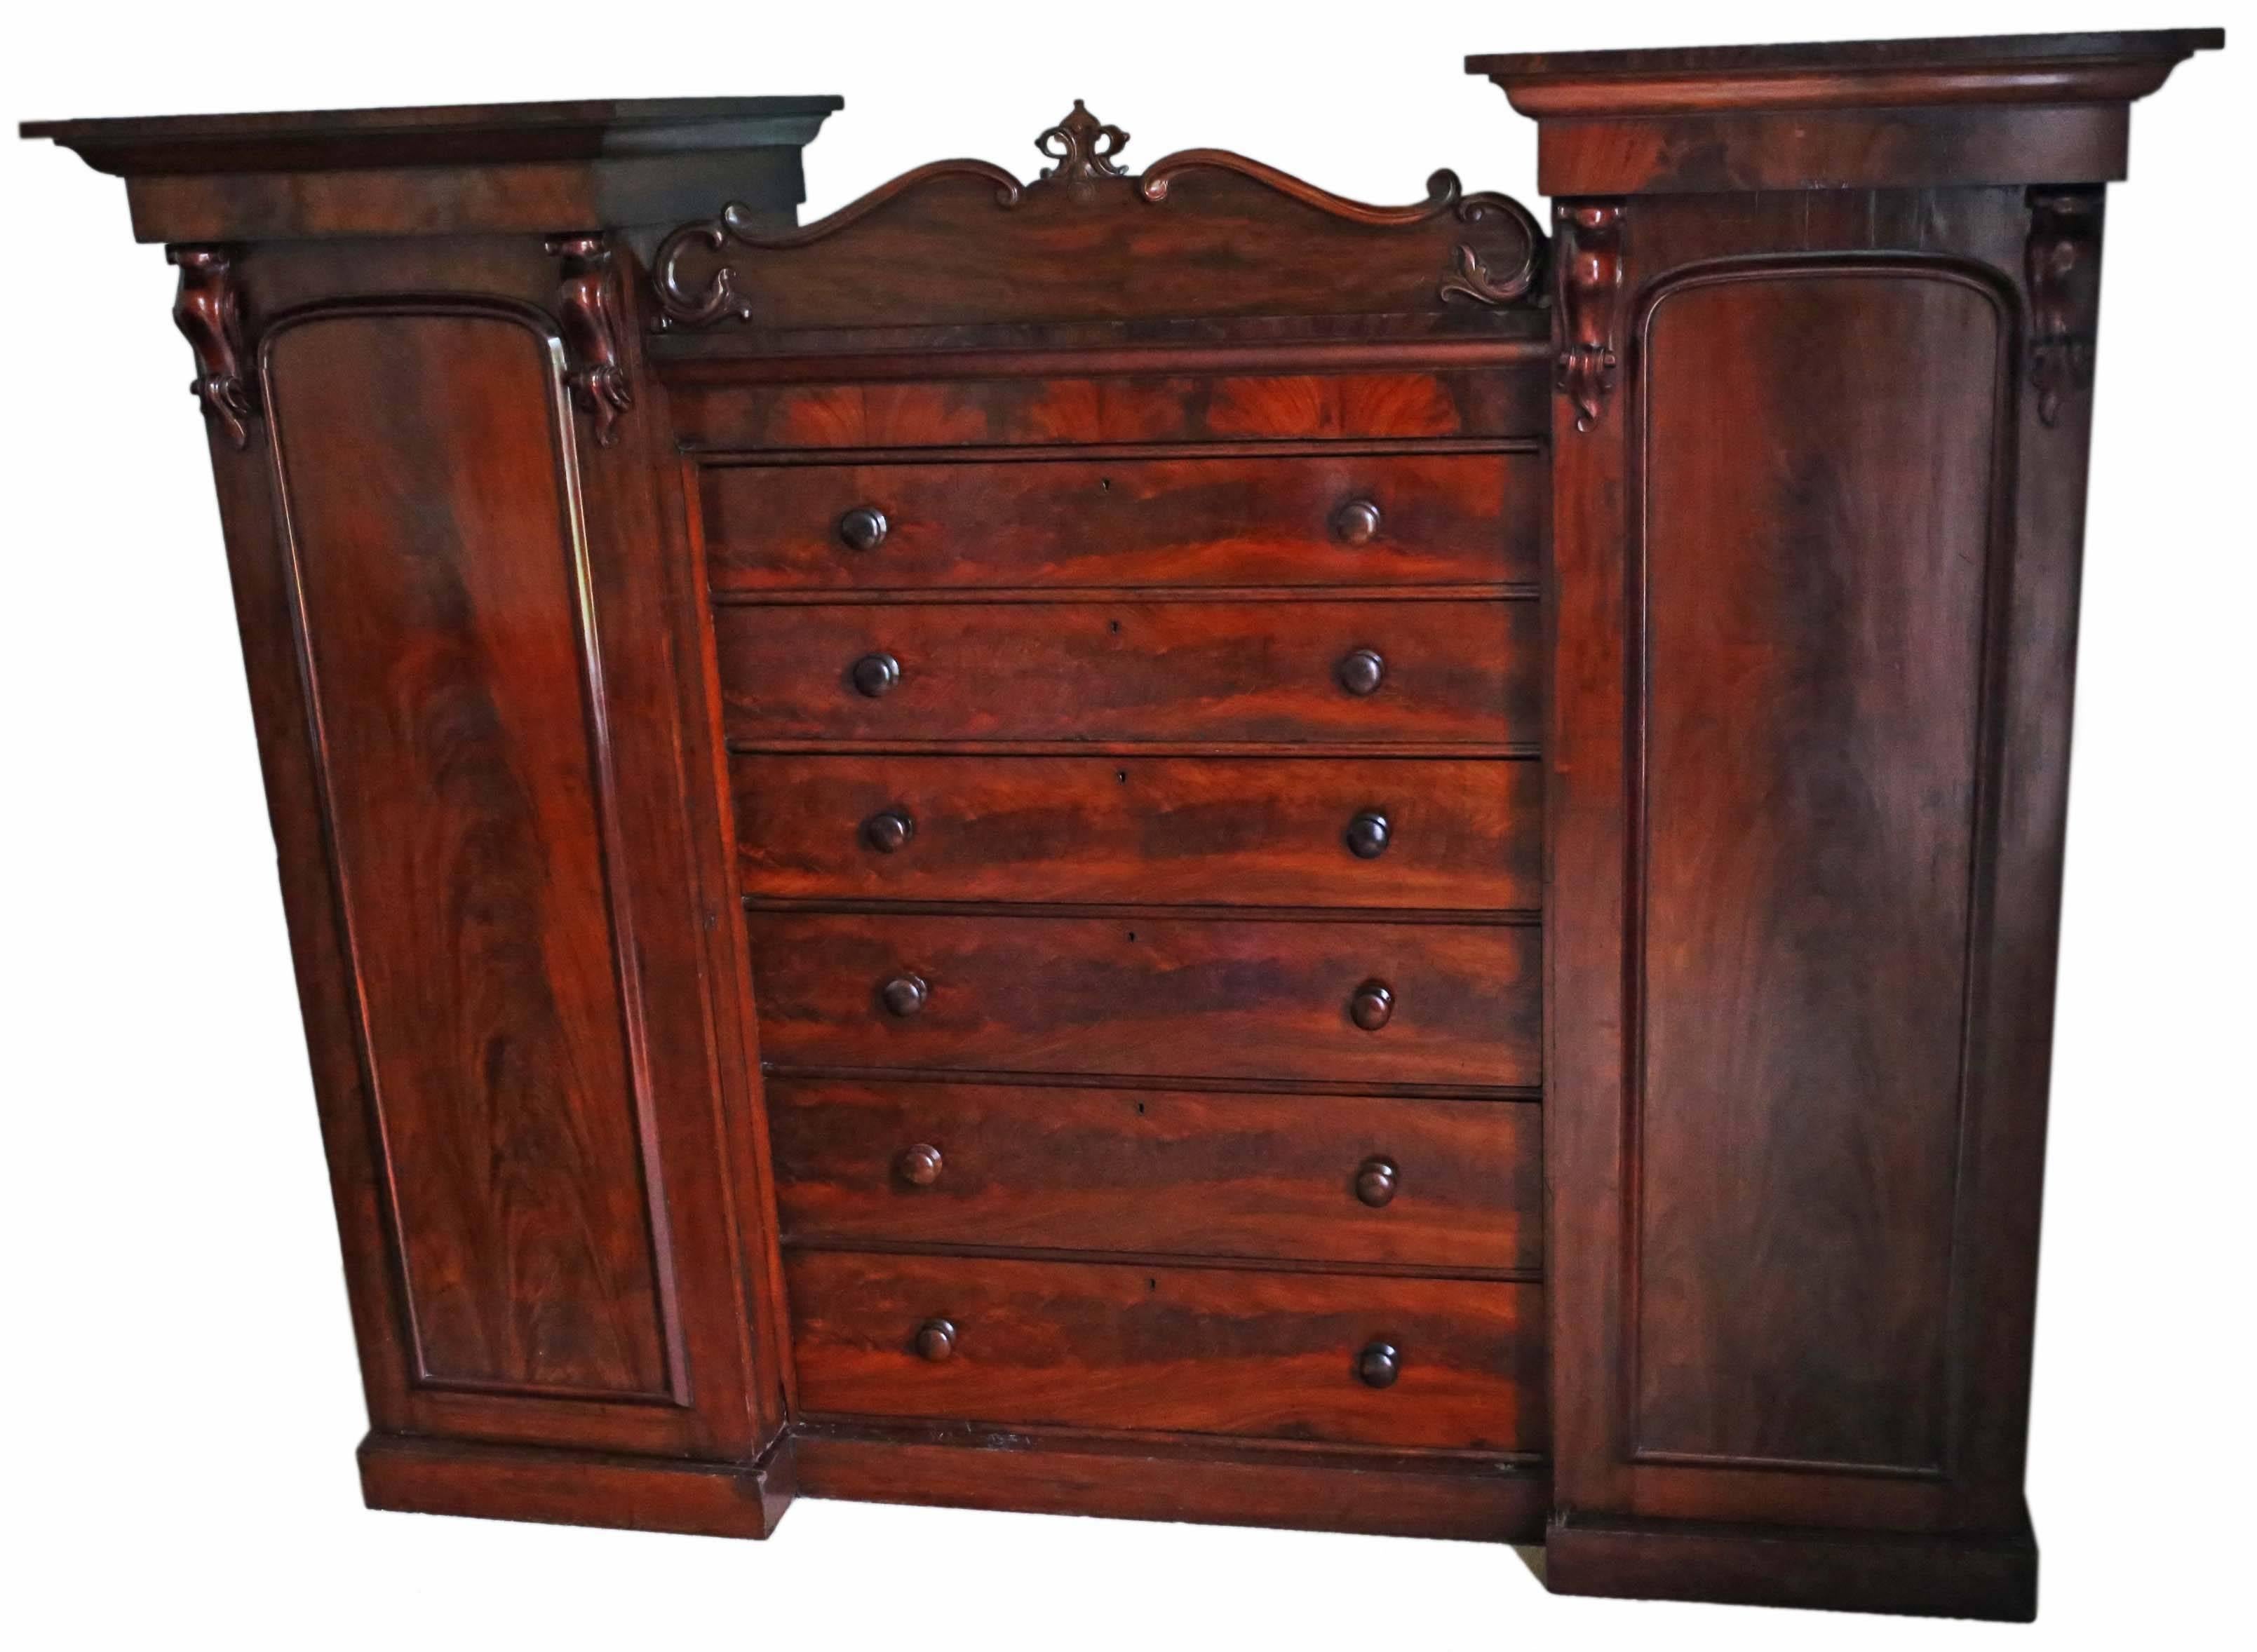 Antique Victorian circa 1860 mahogany compactum wardrobe.

Solid and strong, with no loose joints. Full of age, character and charm. Great matched flame mahogany veneers and patina. Would have been a very expensive piece when made. No